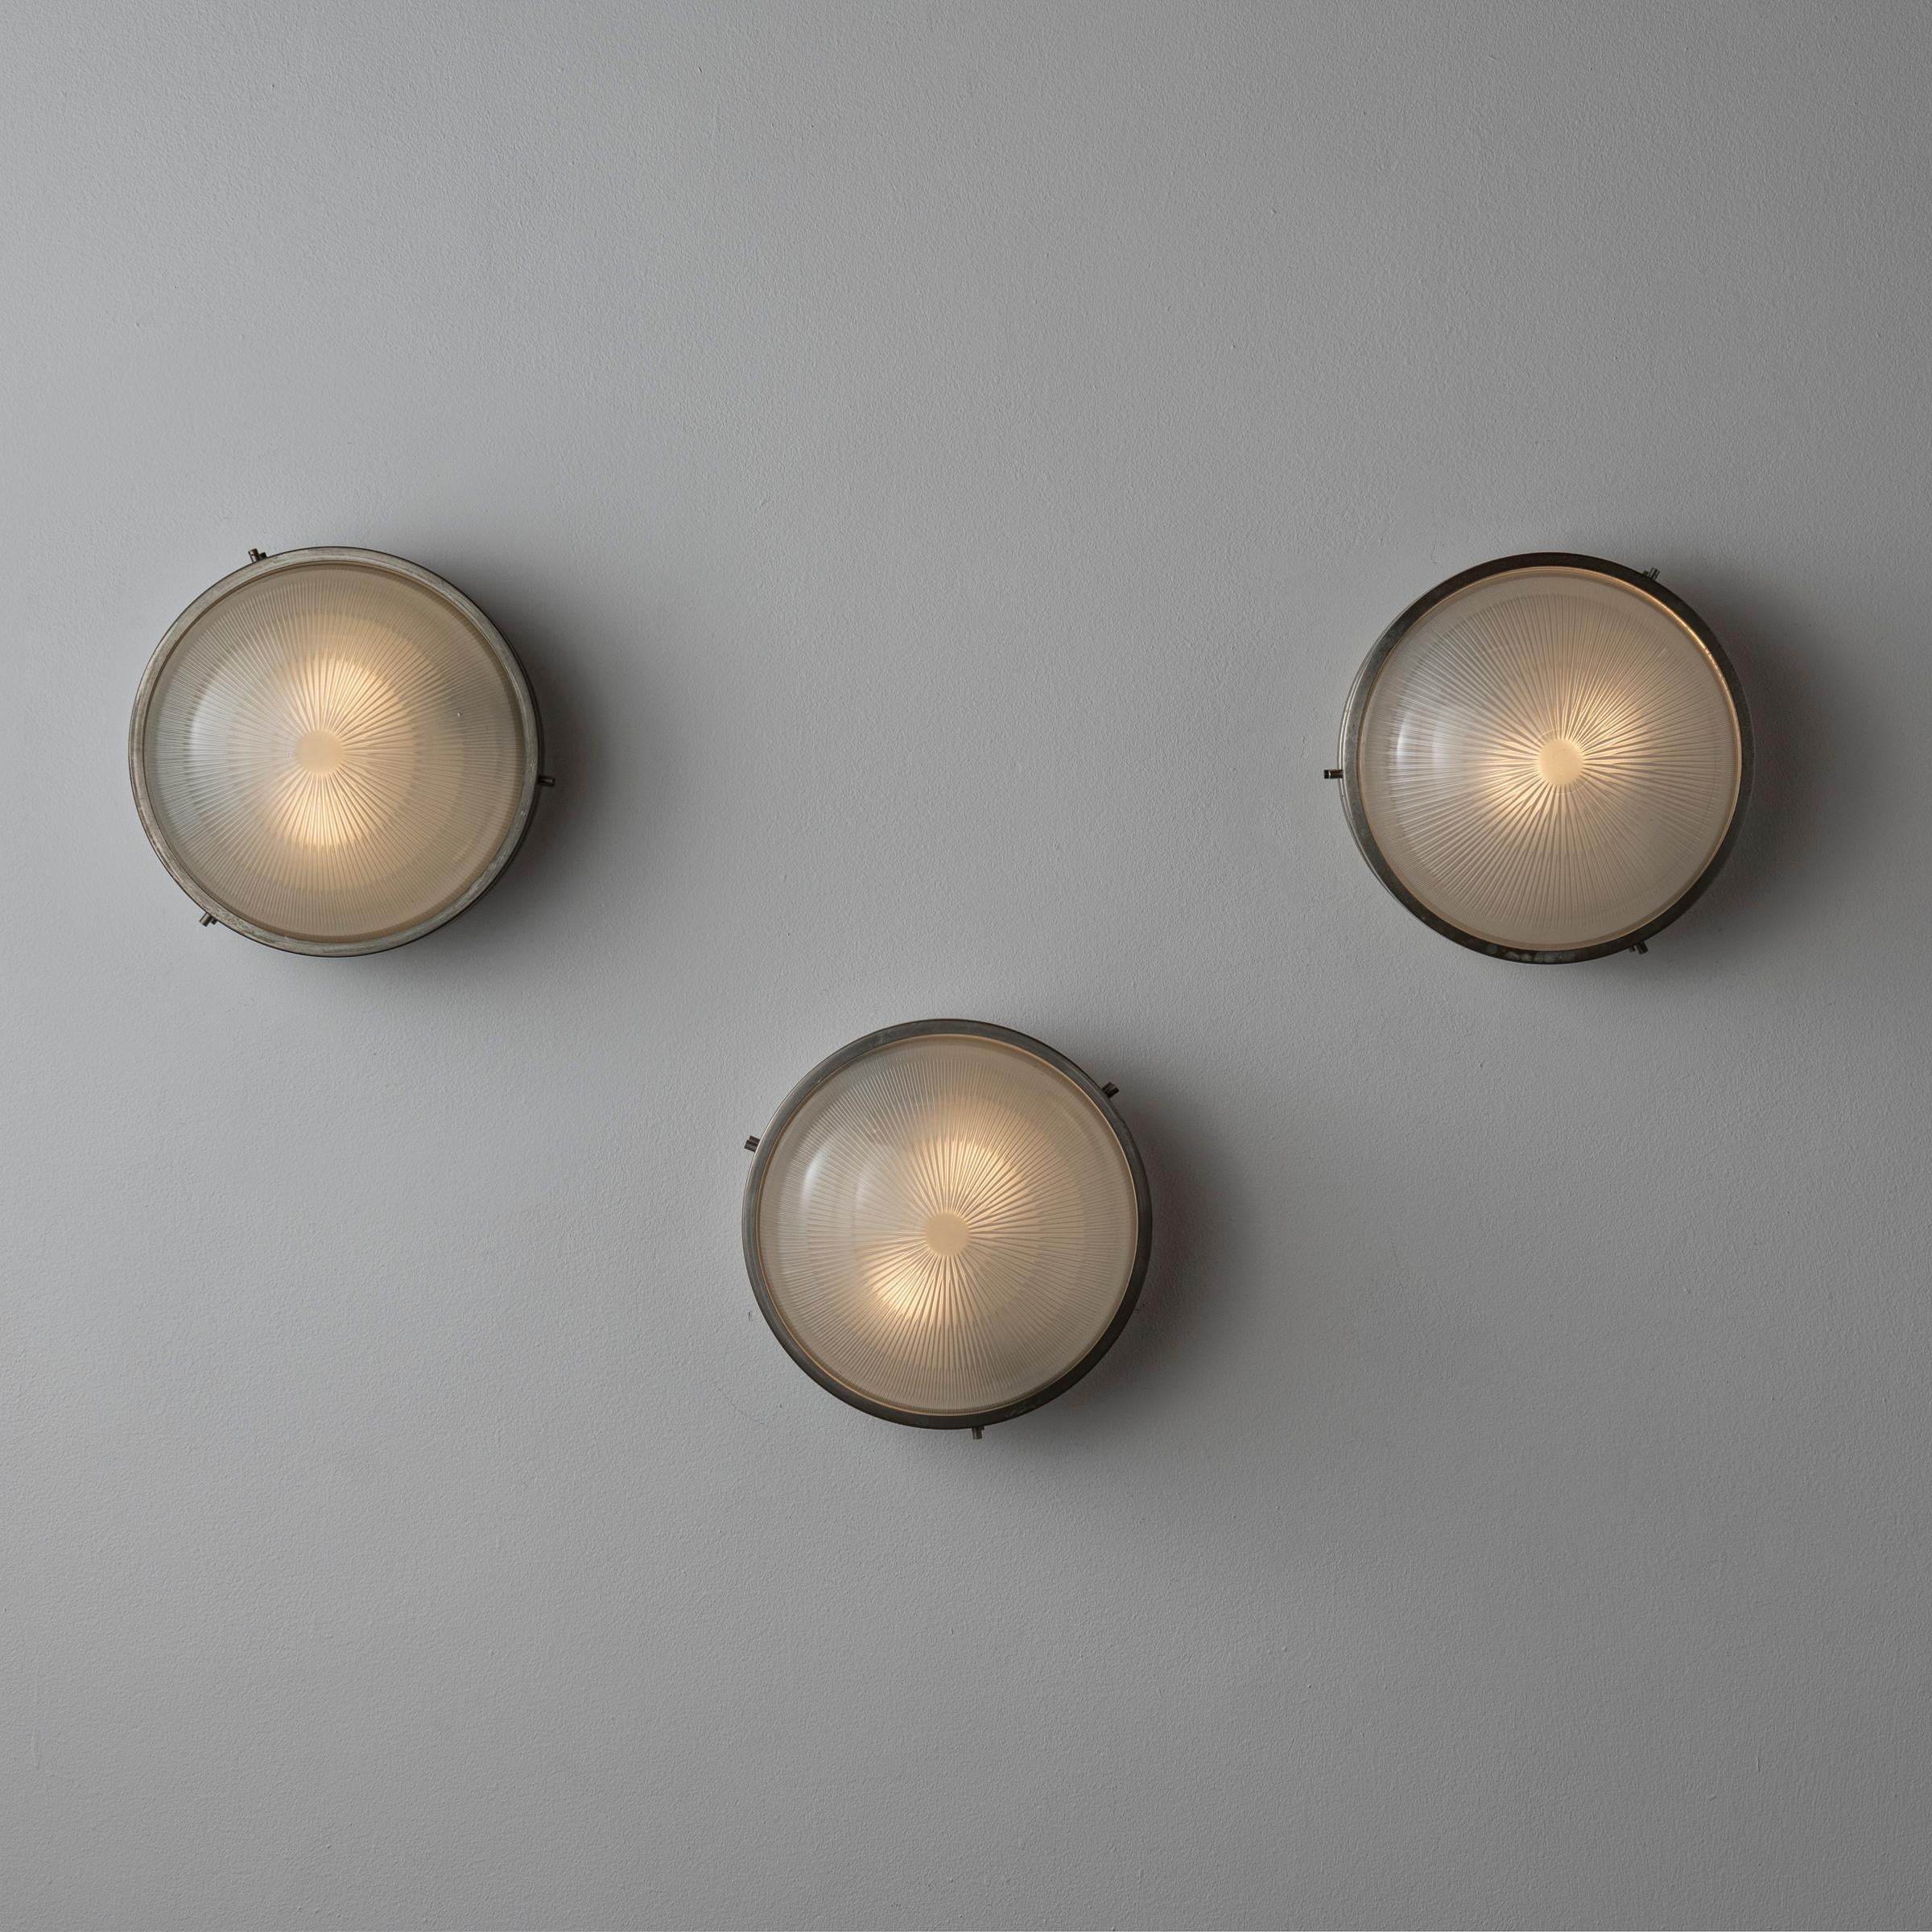 Sconces by Sergio Mazza. Designed and manufactured in Italy, circa 1960s. Patinated nickel plated brass, holophane glass. Custom backplates. Rewired for U.S. standards. We recommend three e27 40w maximum bulbs per sconce. Bulbs provided as a one